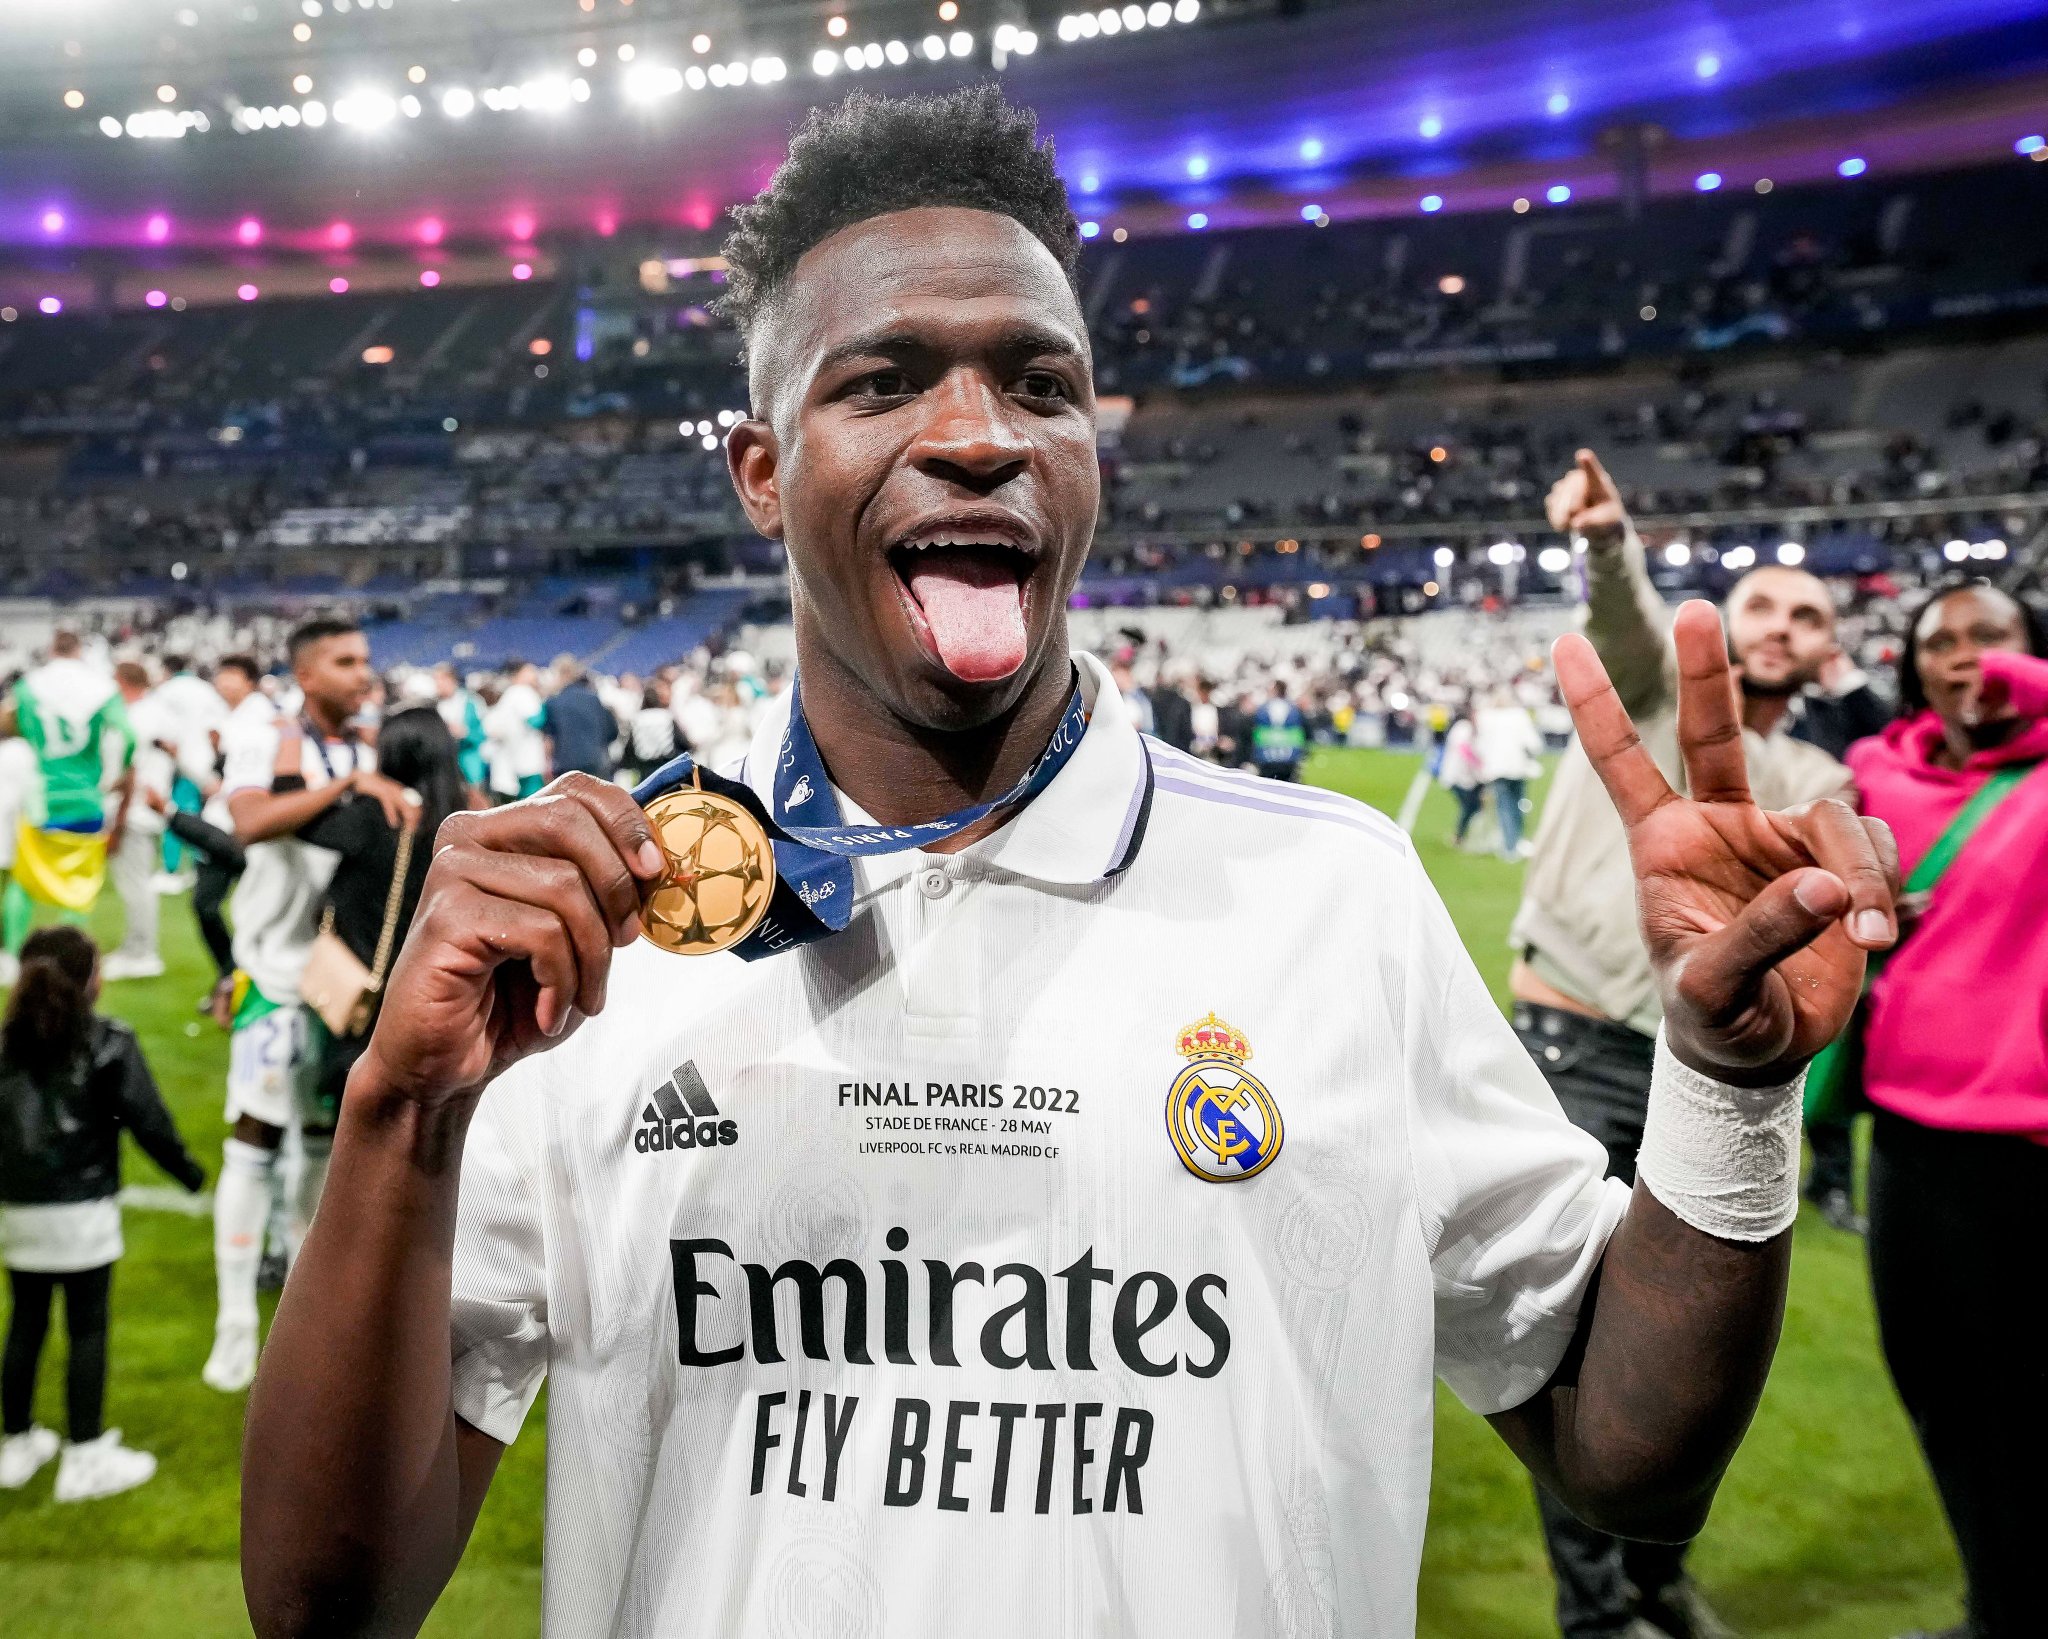 The Tacticians Jr was outstanding for Real Madrid this season and stepped up when his team needed him the most! #Vinicius #RealMadrid #UCLFinal #TheTacticians